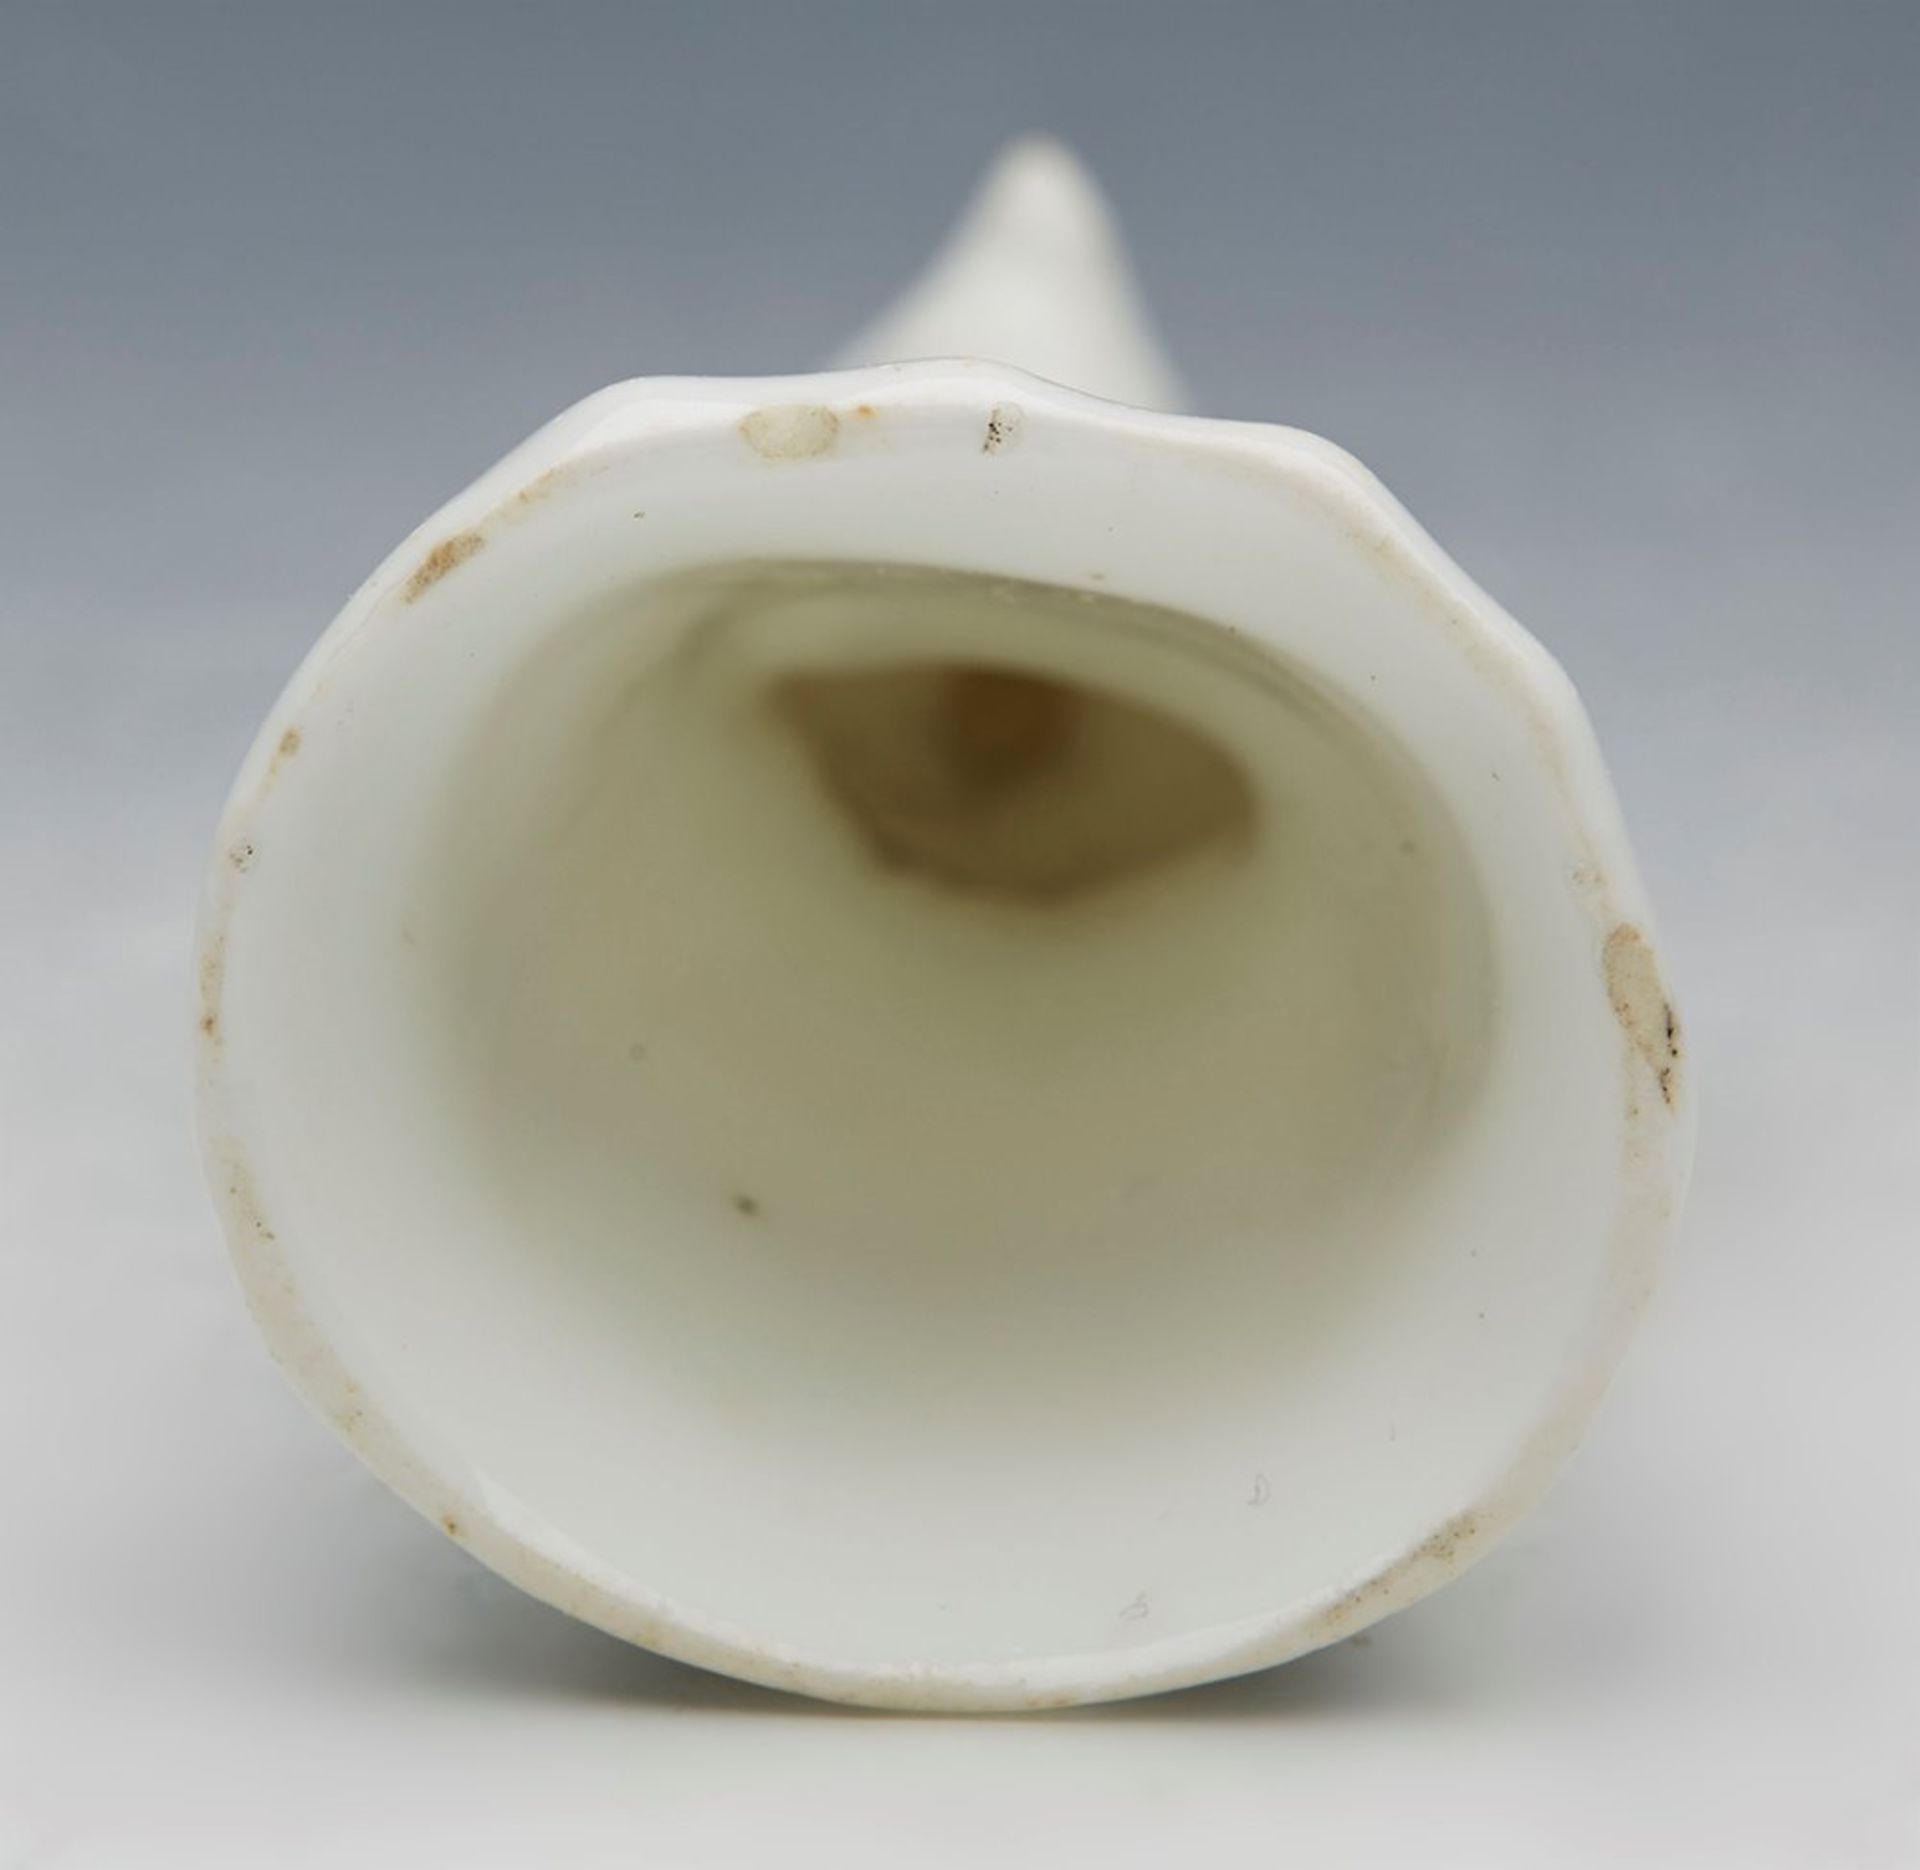 ANTIQUE PORCELAIN CANDLE SNUFFER MODELED AS A PARSON 18/19TH C. - Image 7 of 8